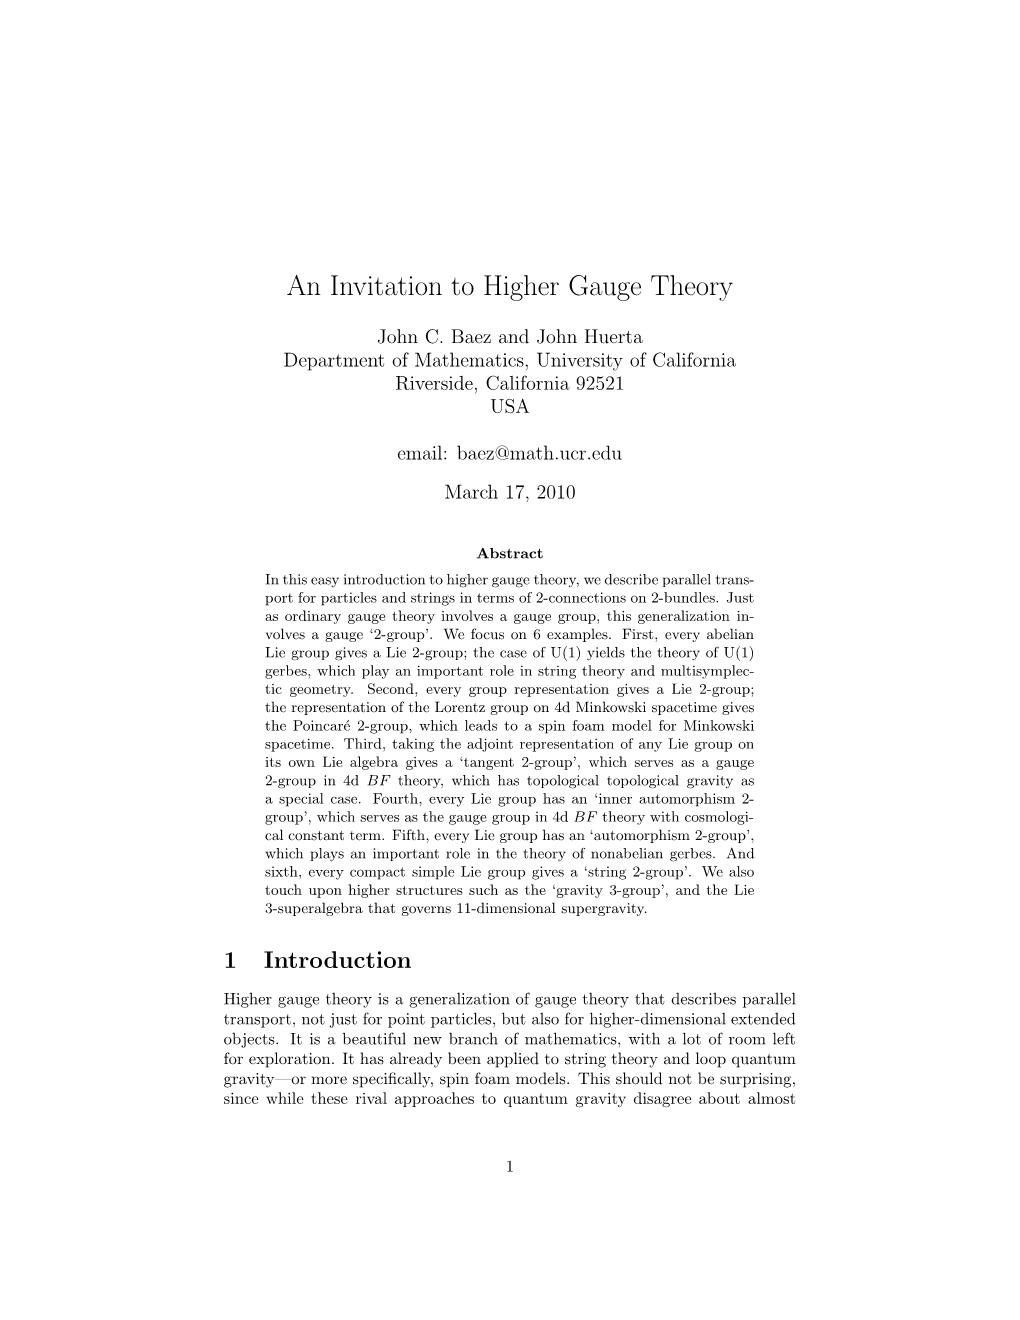 An Invitation to Higher Gauge Theory